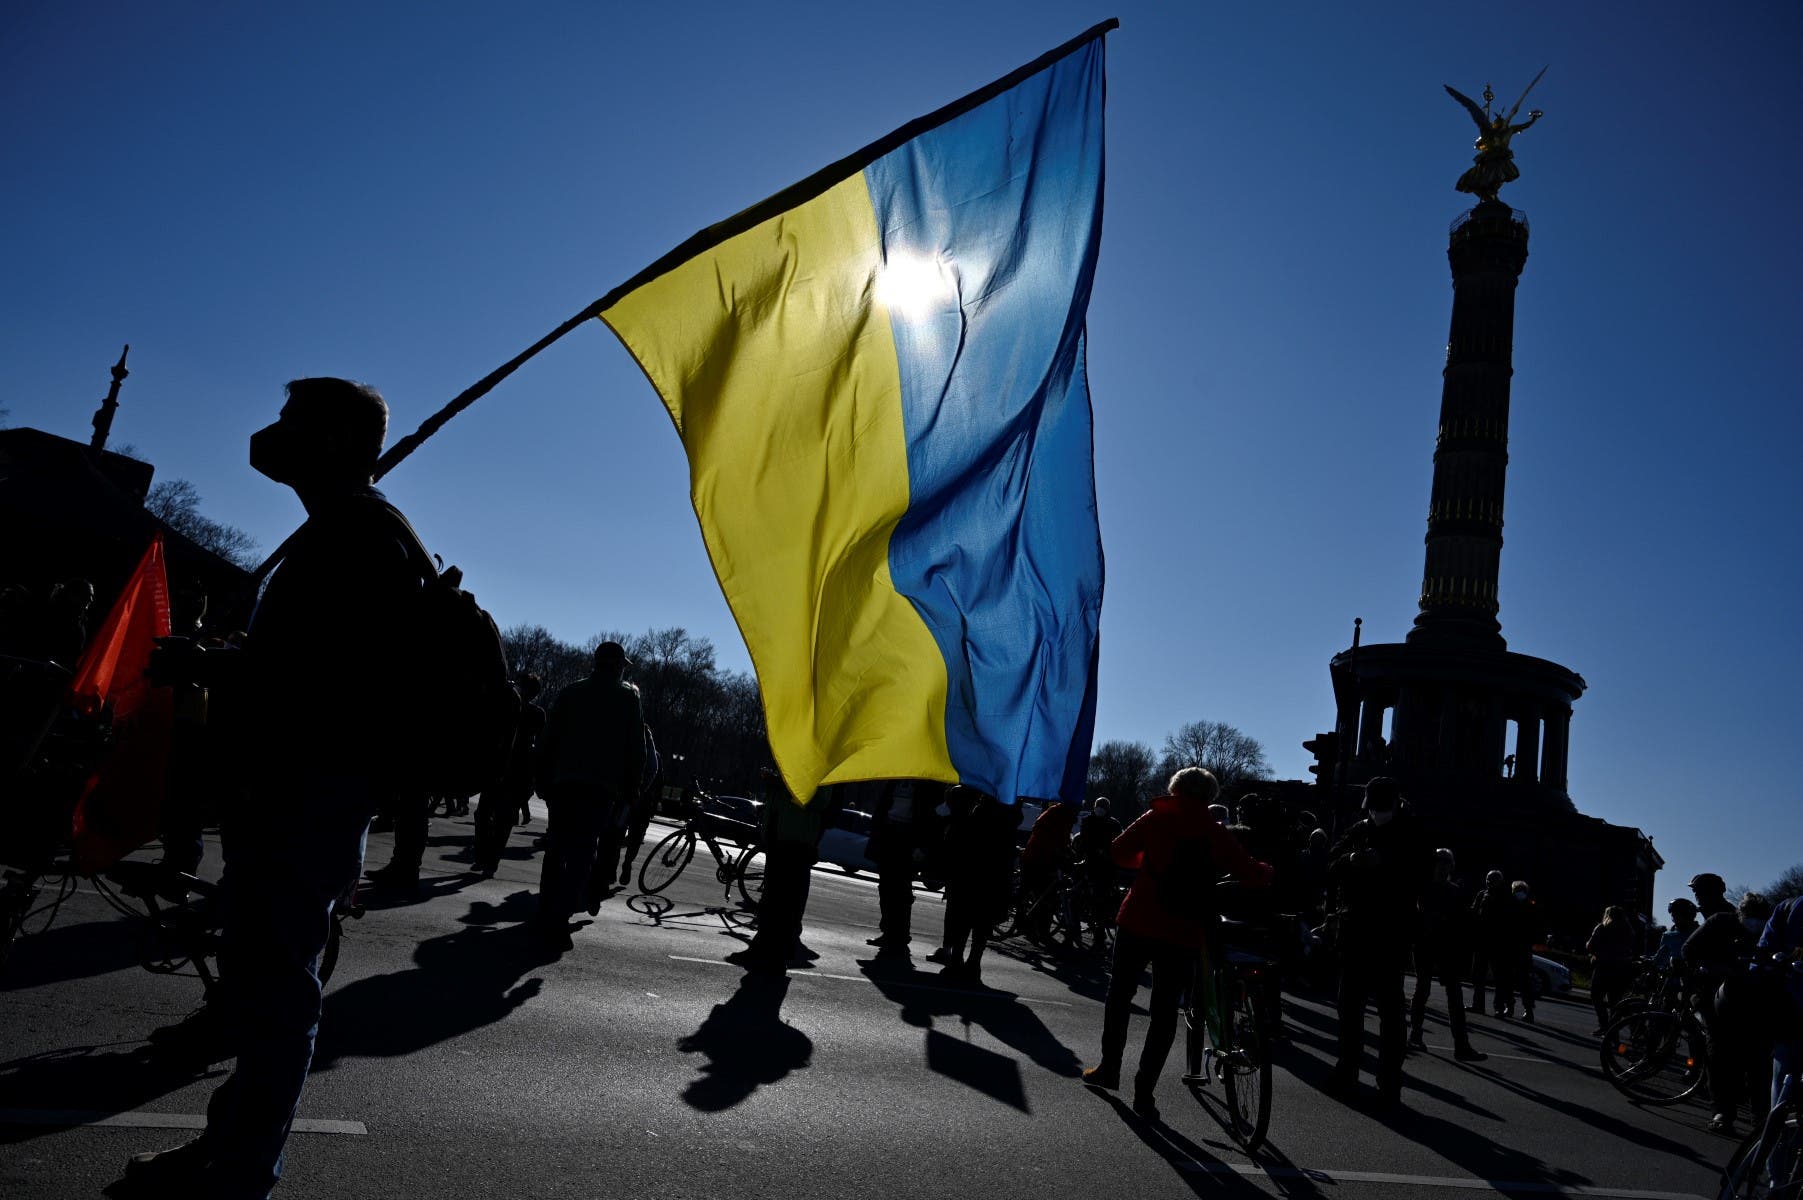 The Ukrainian flag was raised at a demonstration in Berlin last March to condemn the Russian military operation